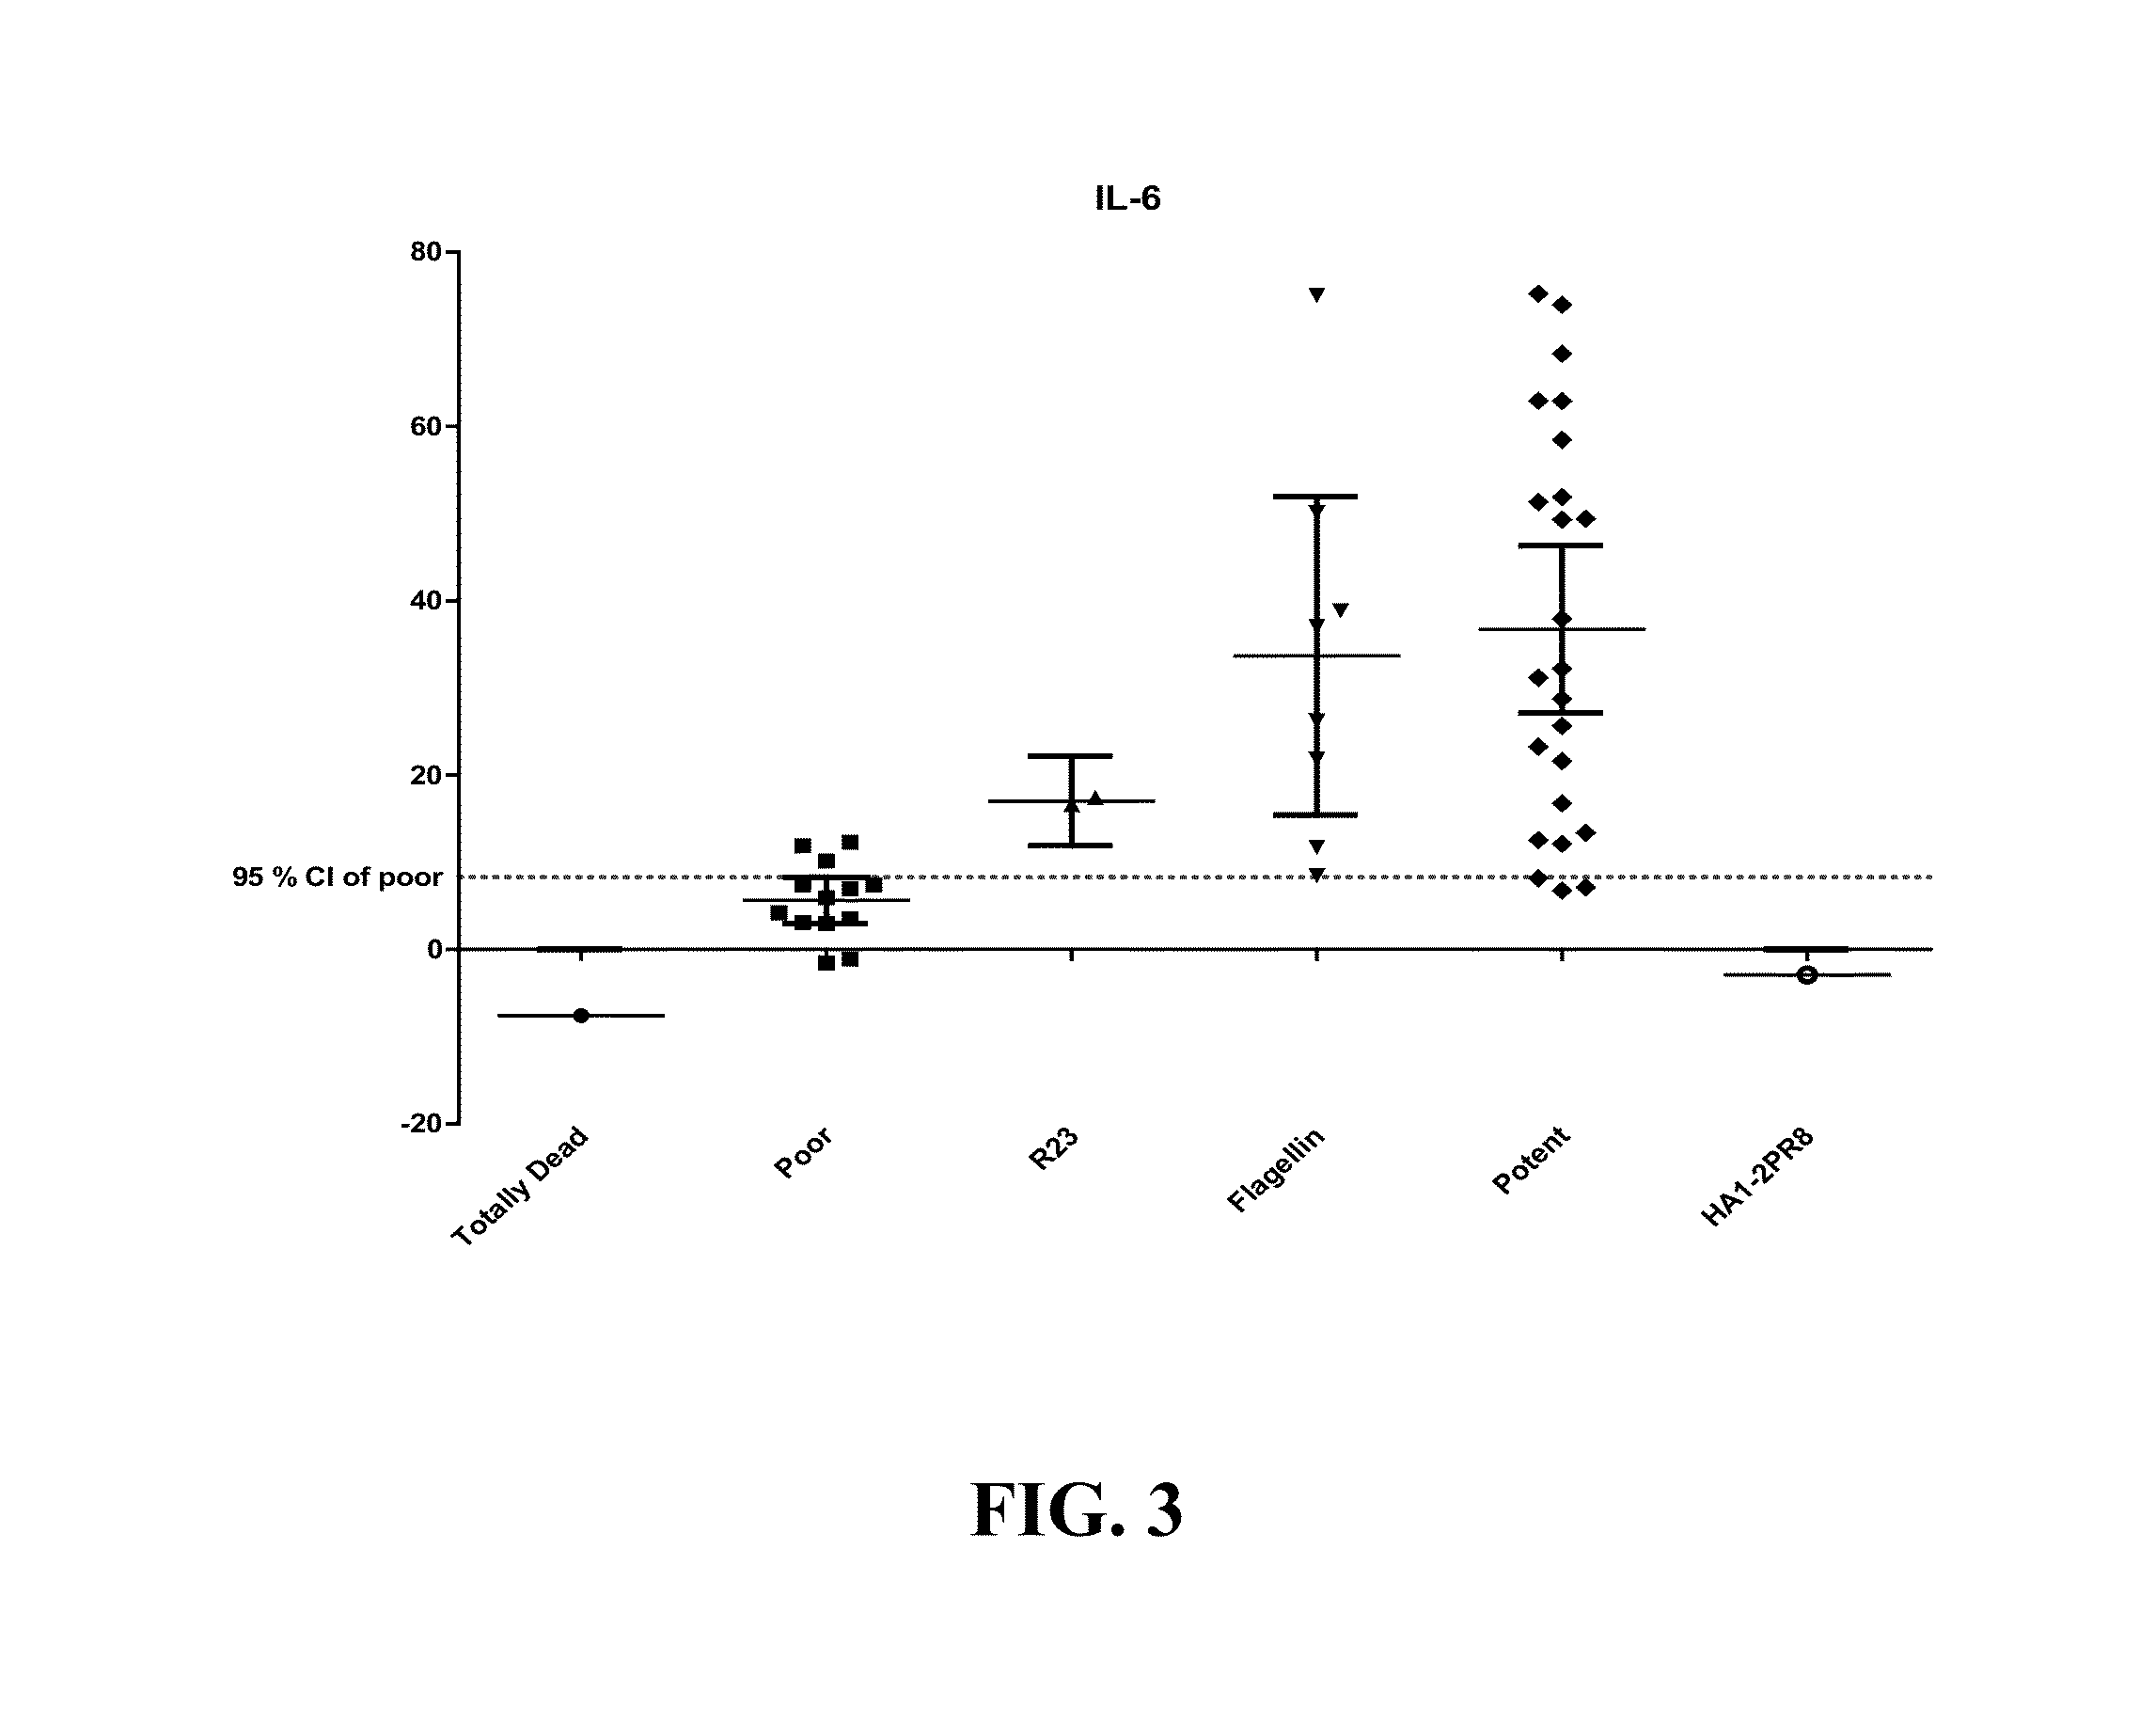 Compositions with enhanced immunogenicity and/or reduced reactogenicity